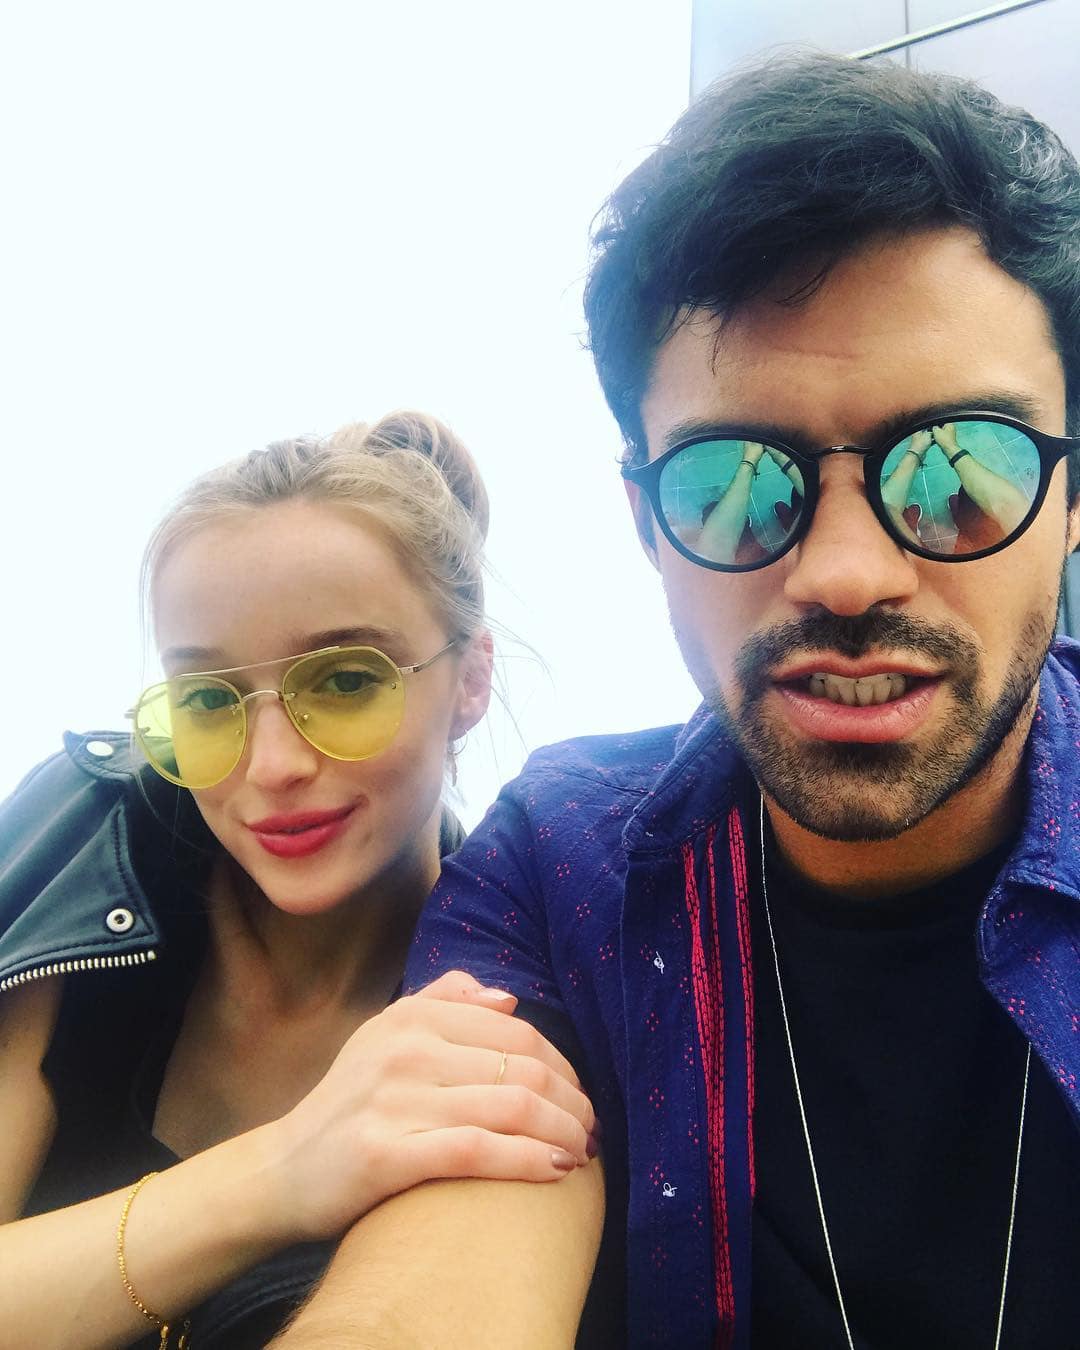 Before her breakout role in Bridgerton, Phoebe Dynevor briefly dated Skins star Sean Teale in 2017